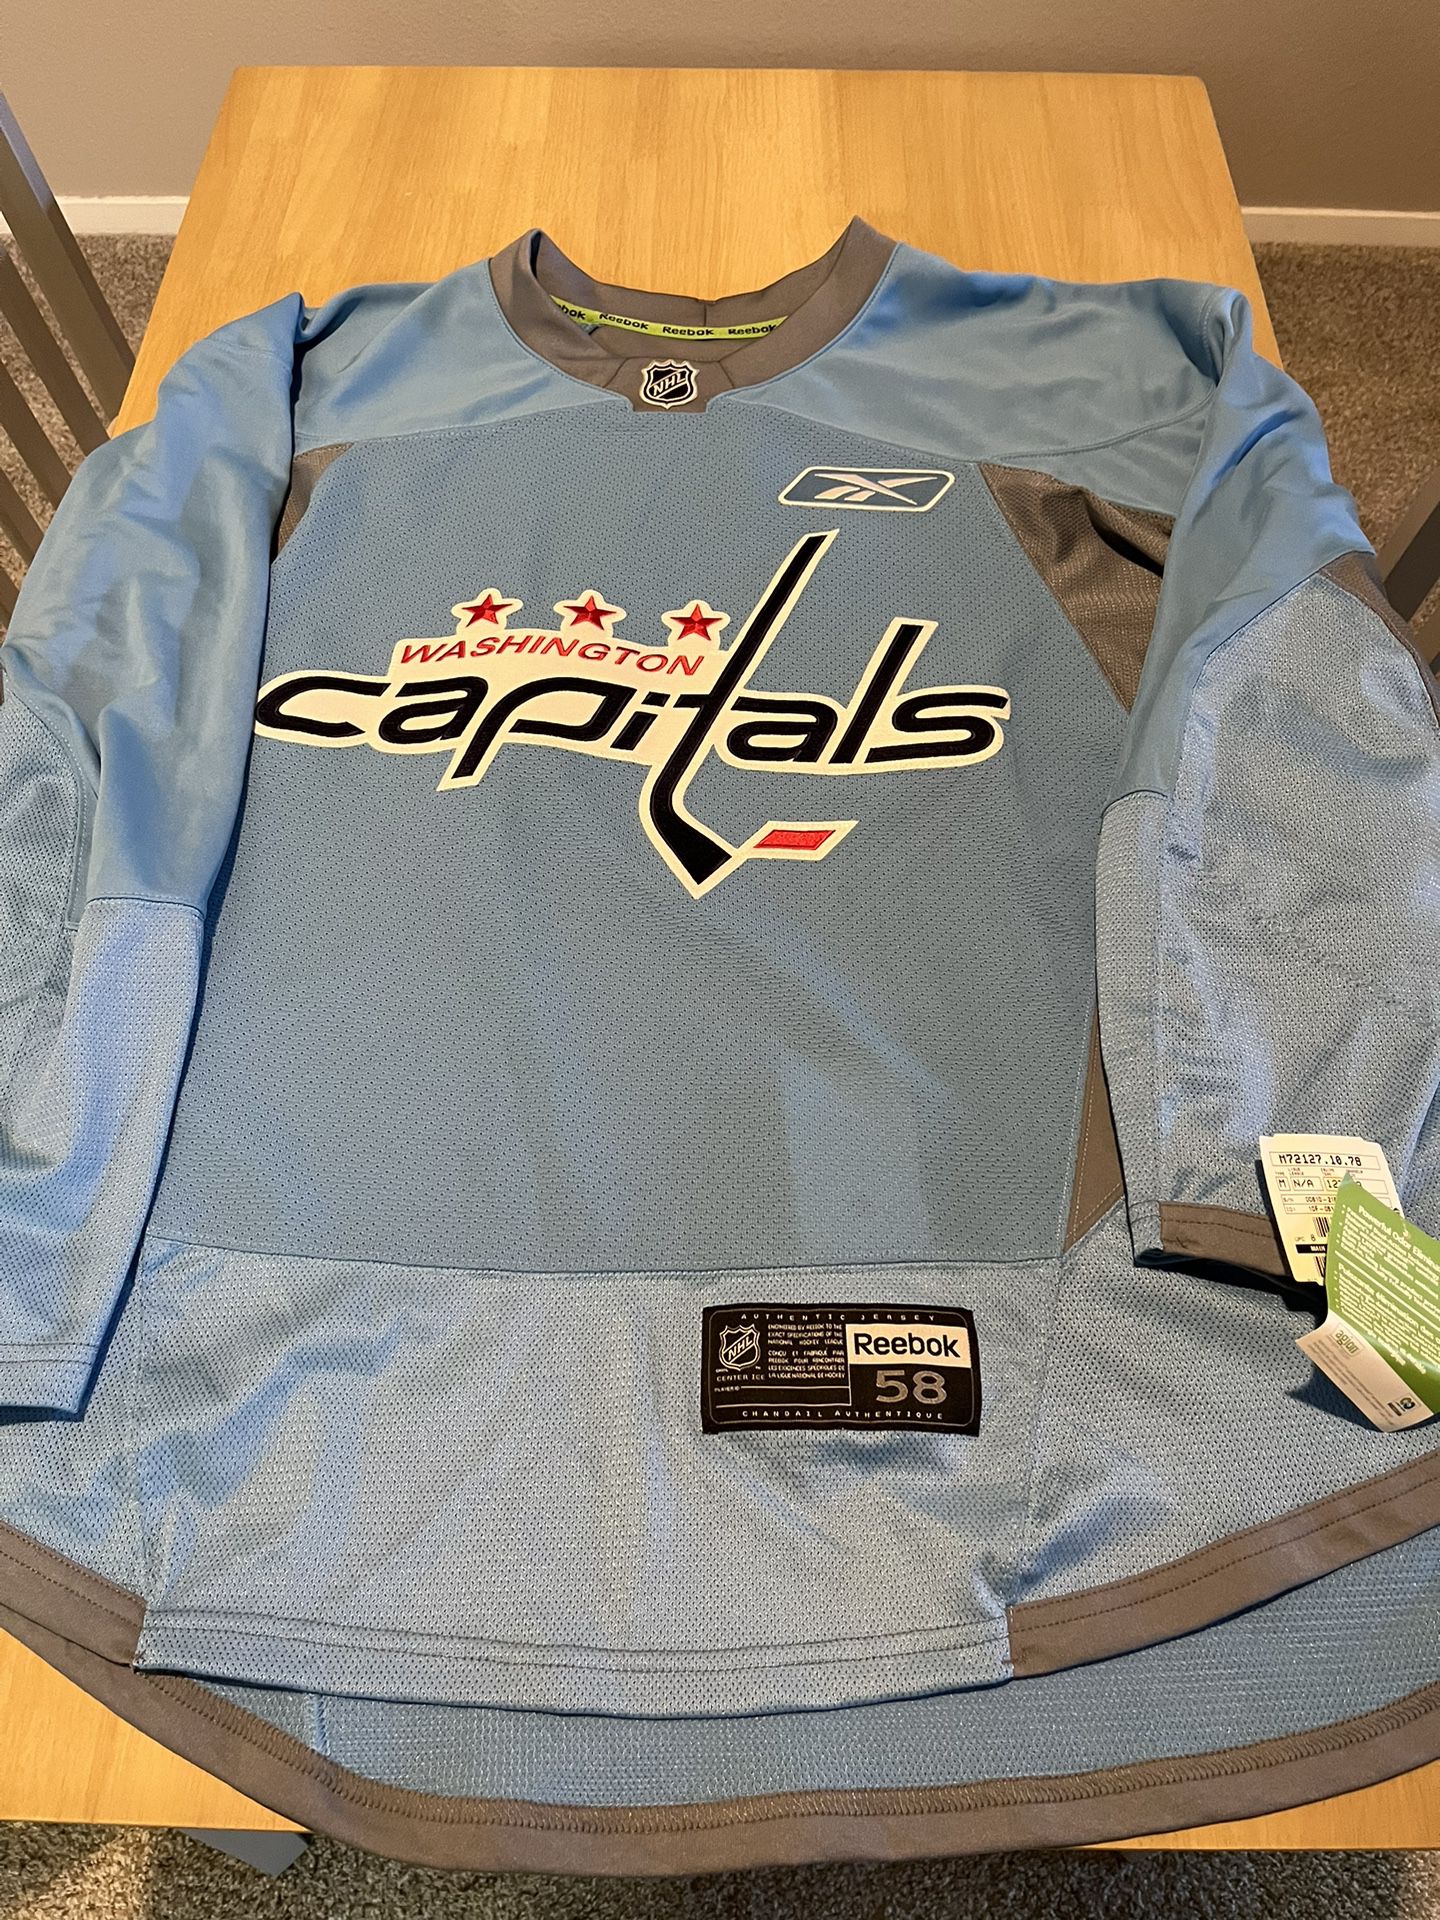 Nhl Practice Jersey for sale